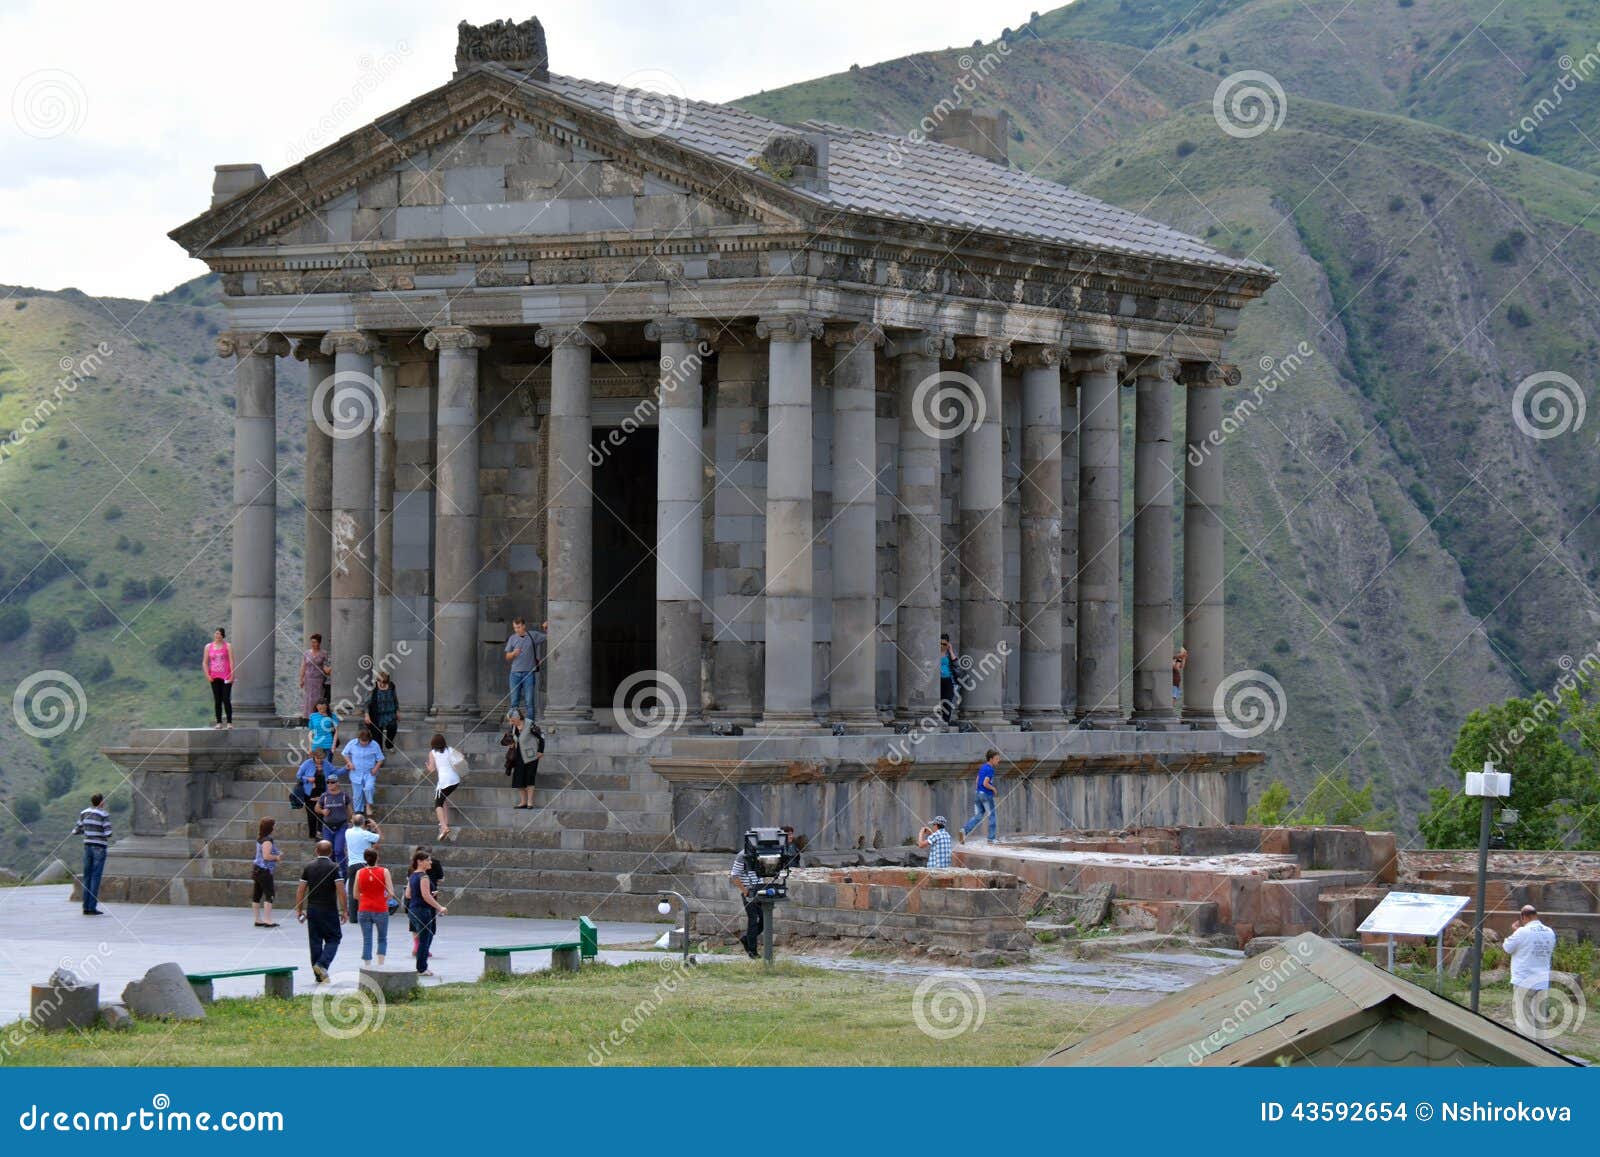 Garni temple in summer. Garni temple with the tourists walking nearby in the summer day